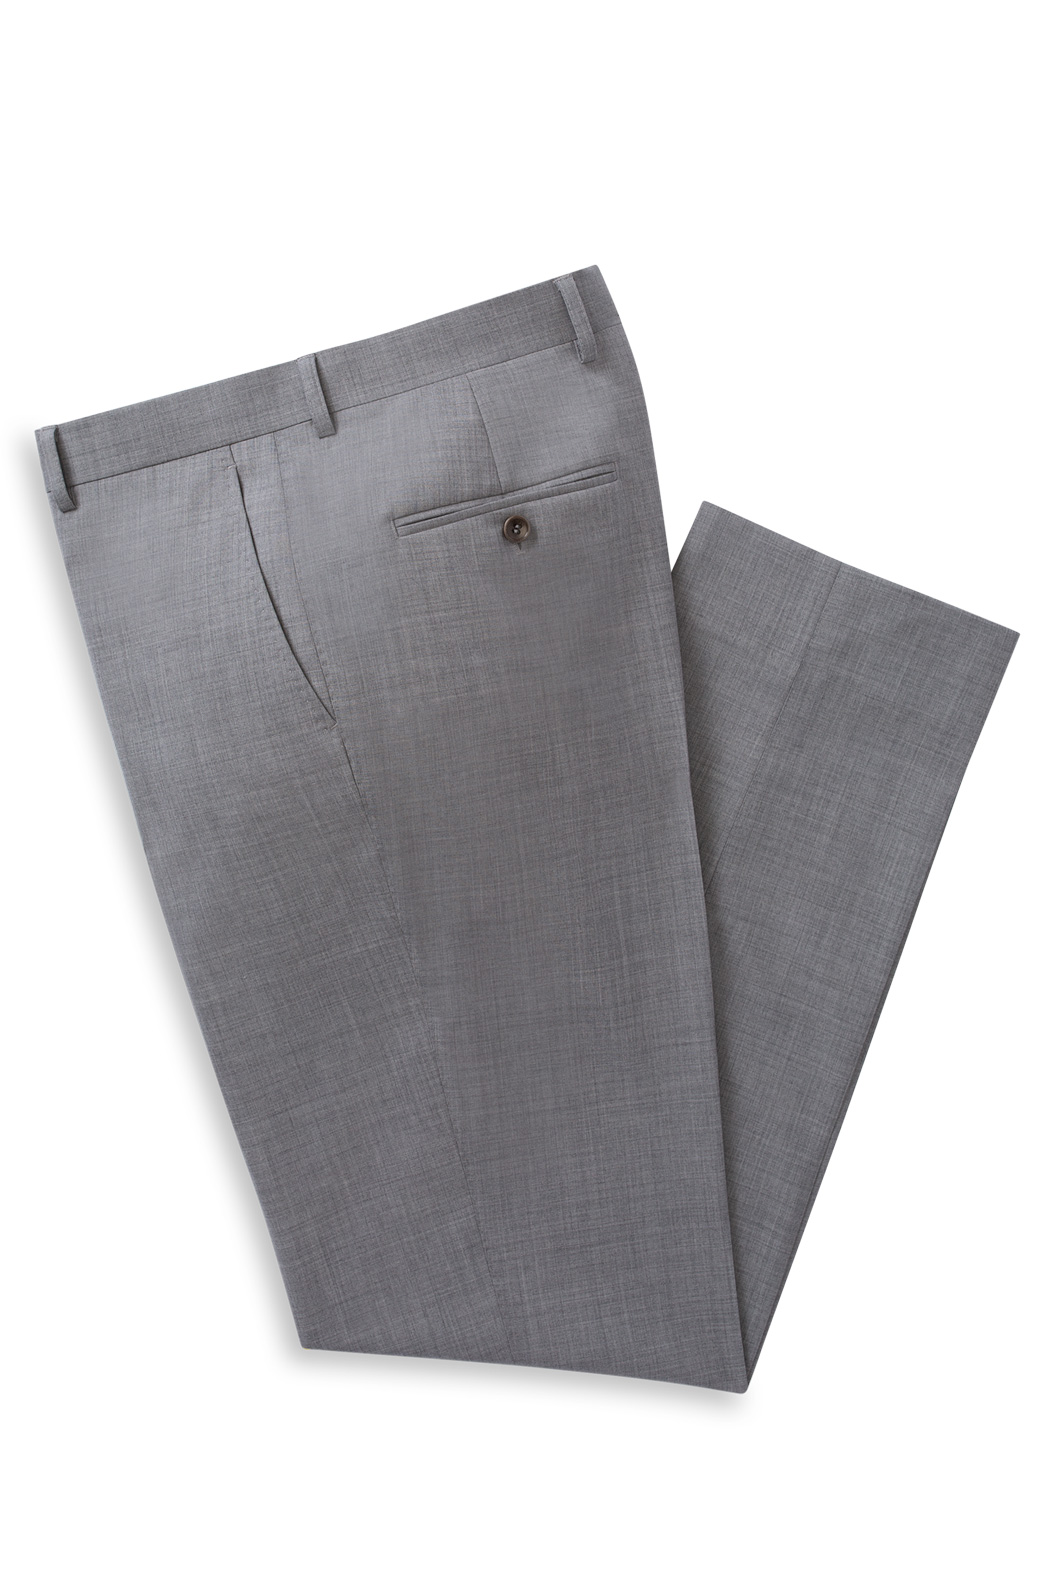 Custom Made Chinos, trousers and more for Men | Knot Standard